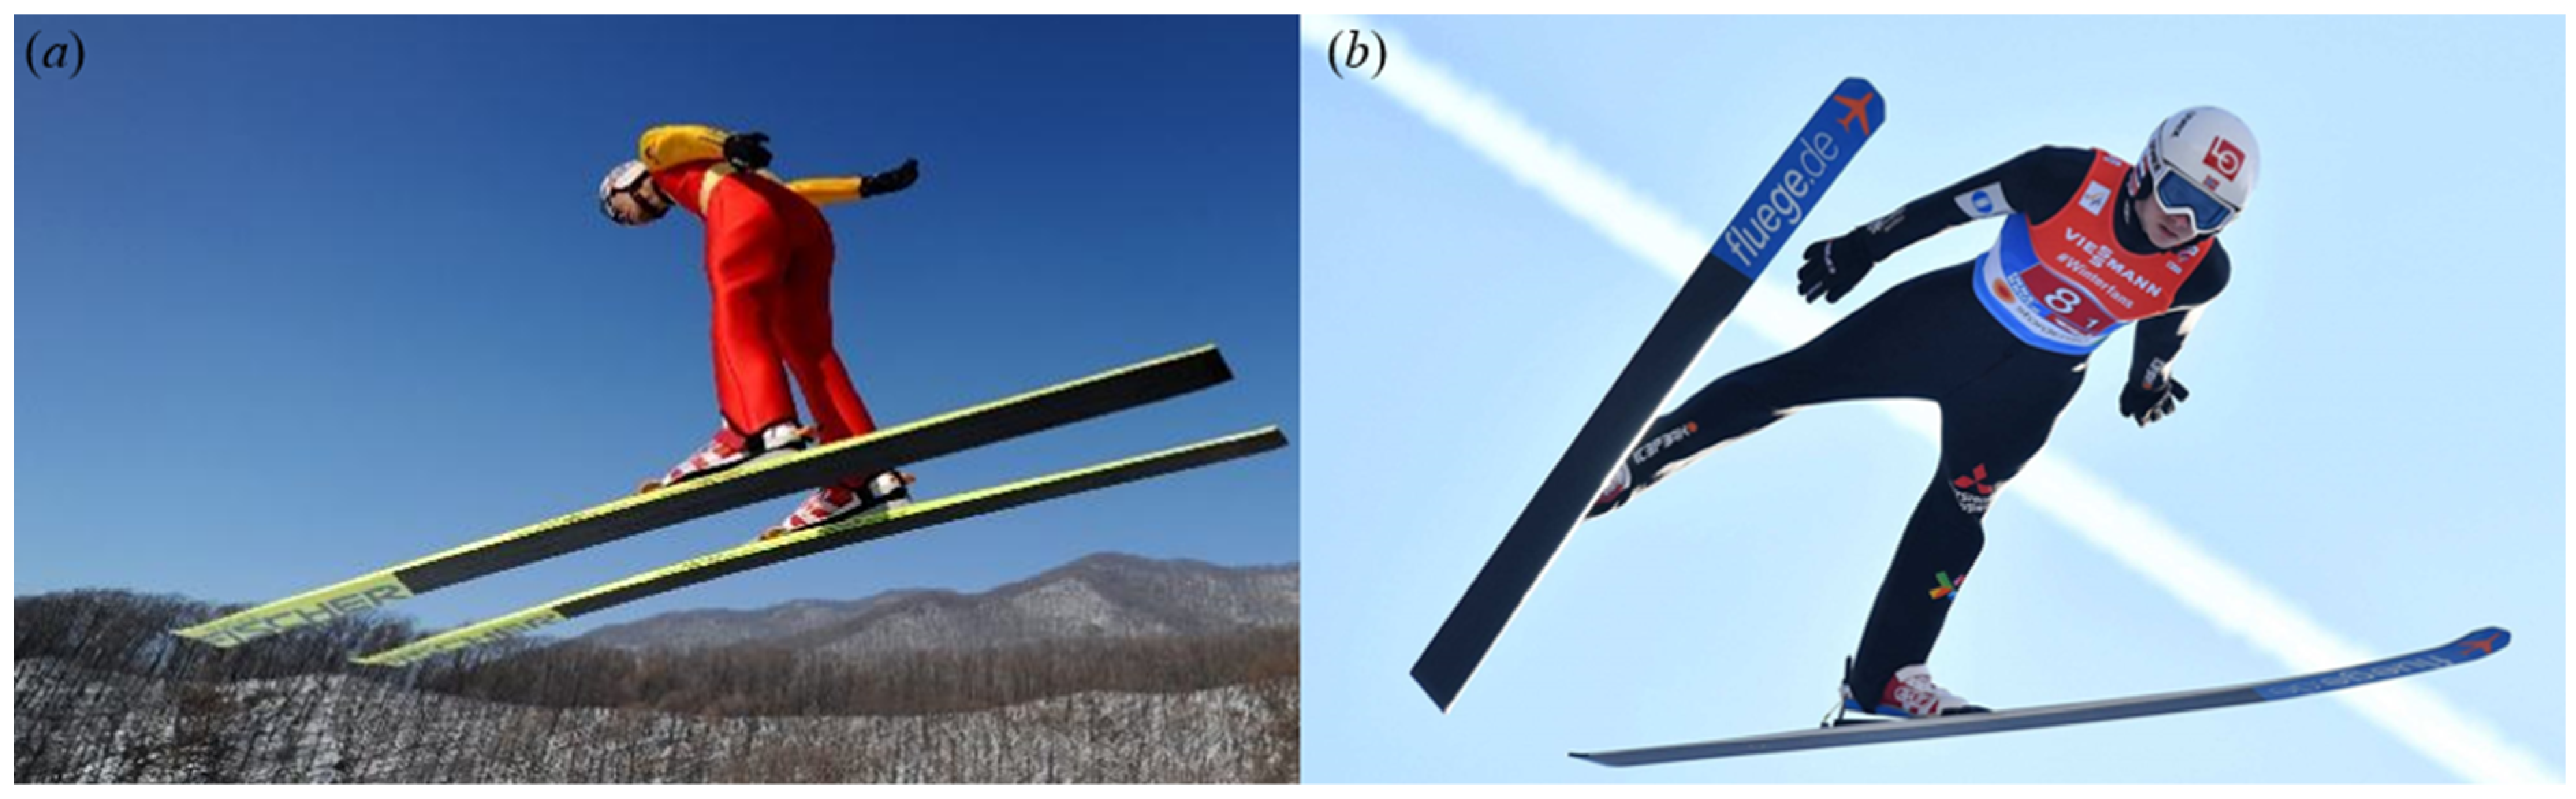 Biology | Free Full-Text | Performance and Biomechanics in the Flight  Period of Ski Jumping: Influence of Ski Attitude